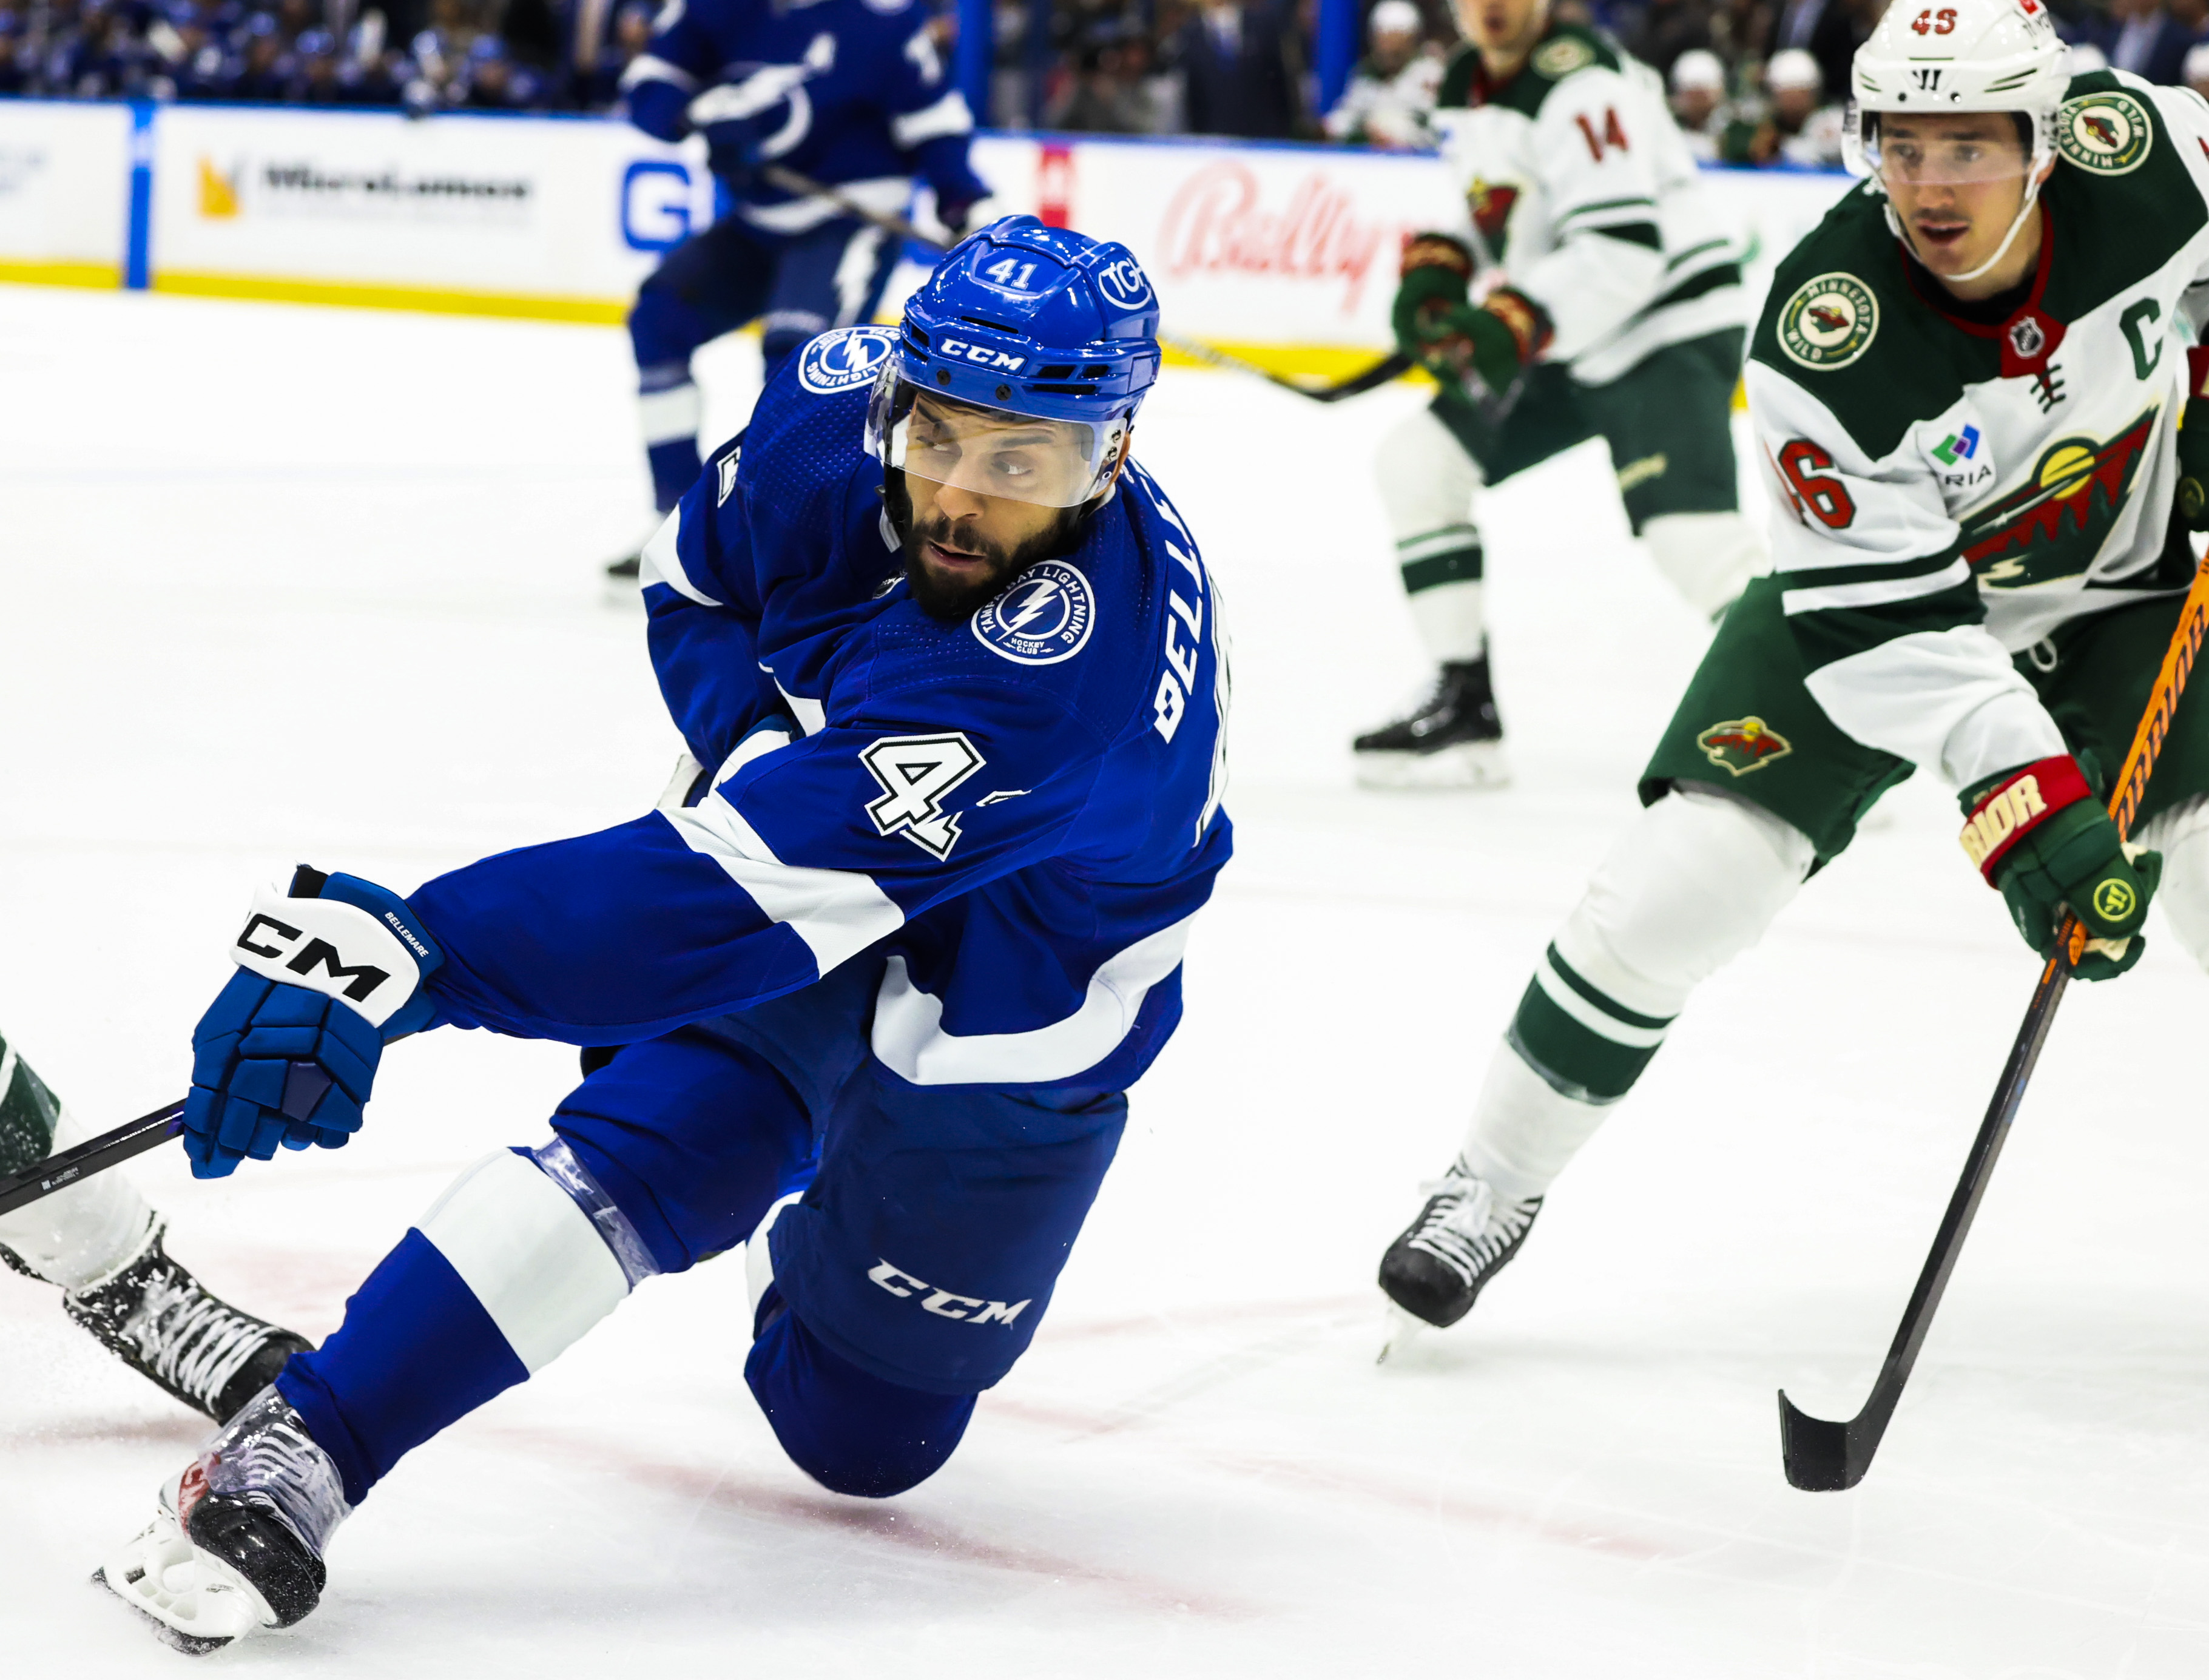 Stamkos, Perry lead Lightning to 4-2 win over Wild